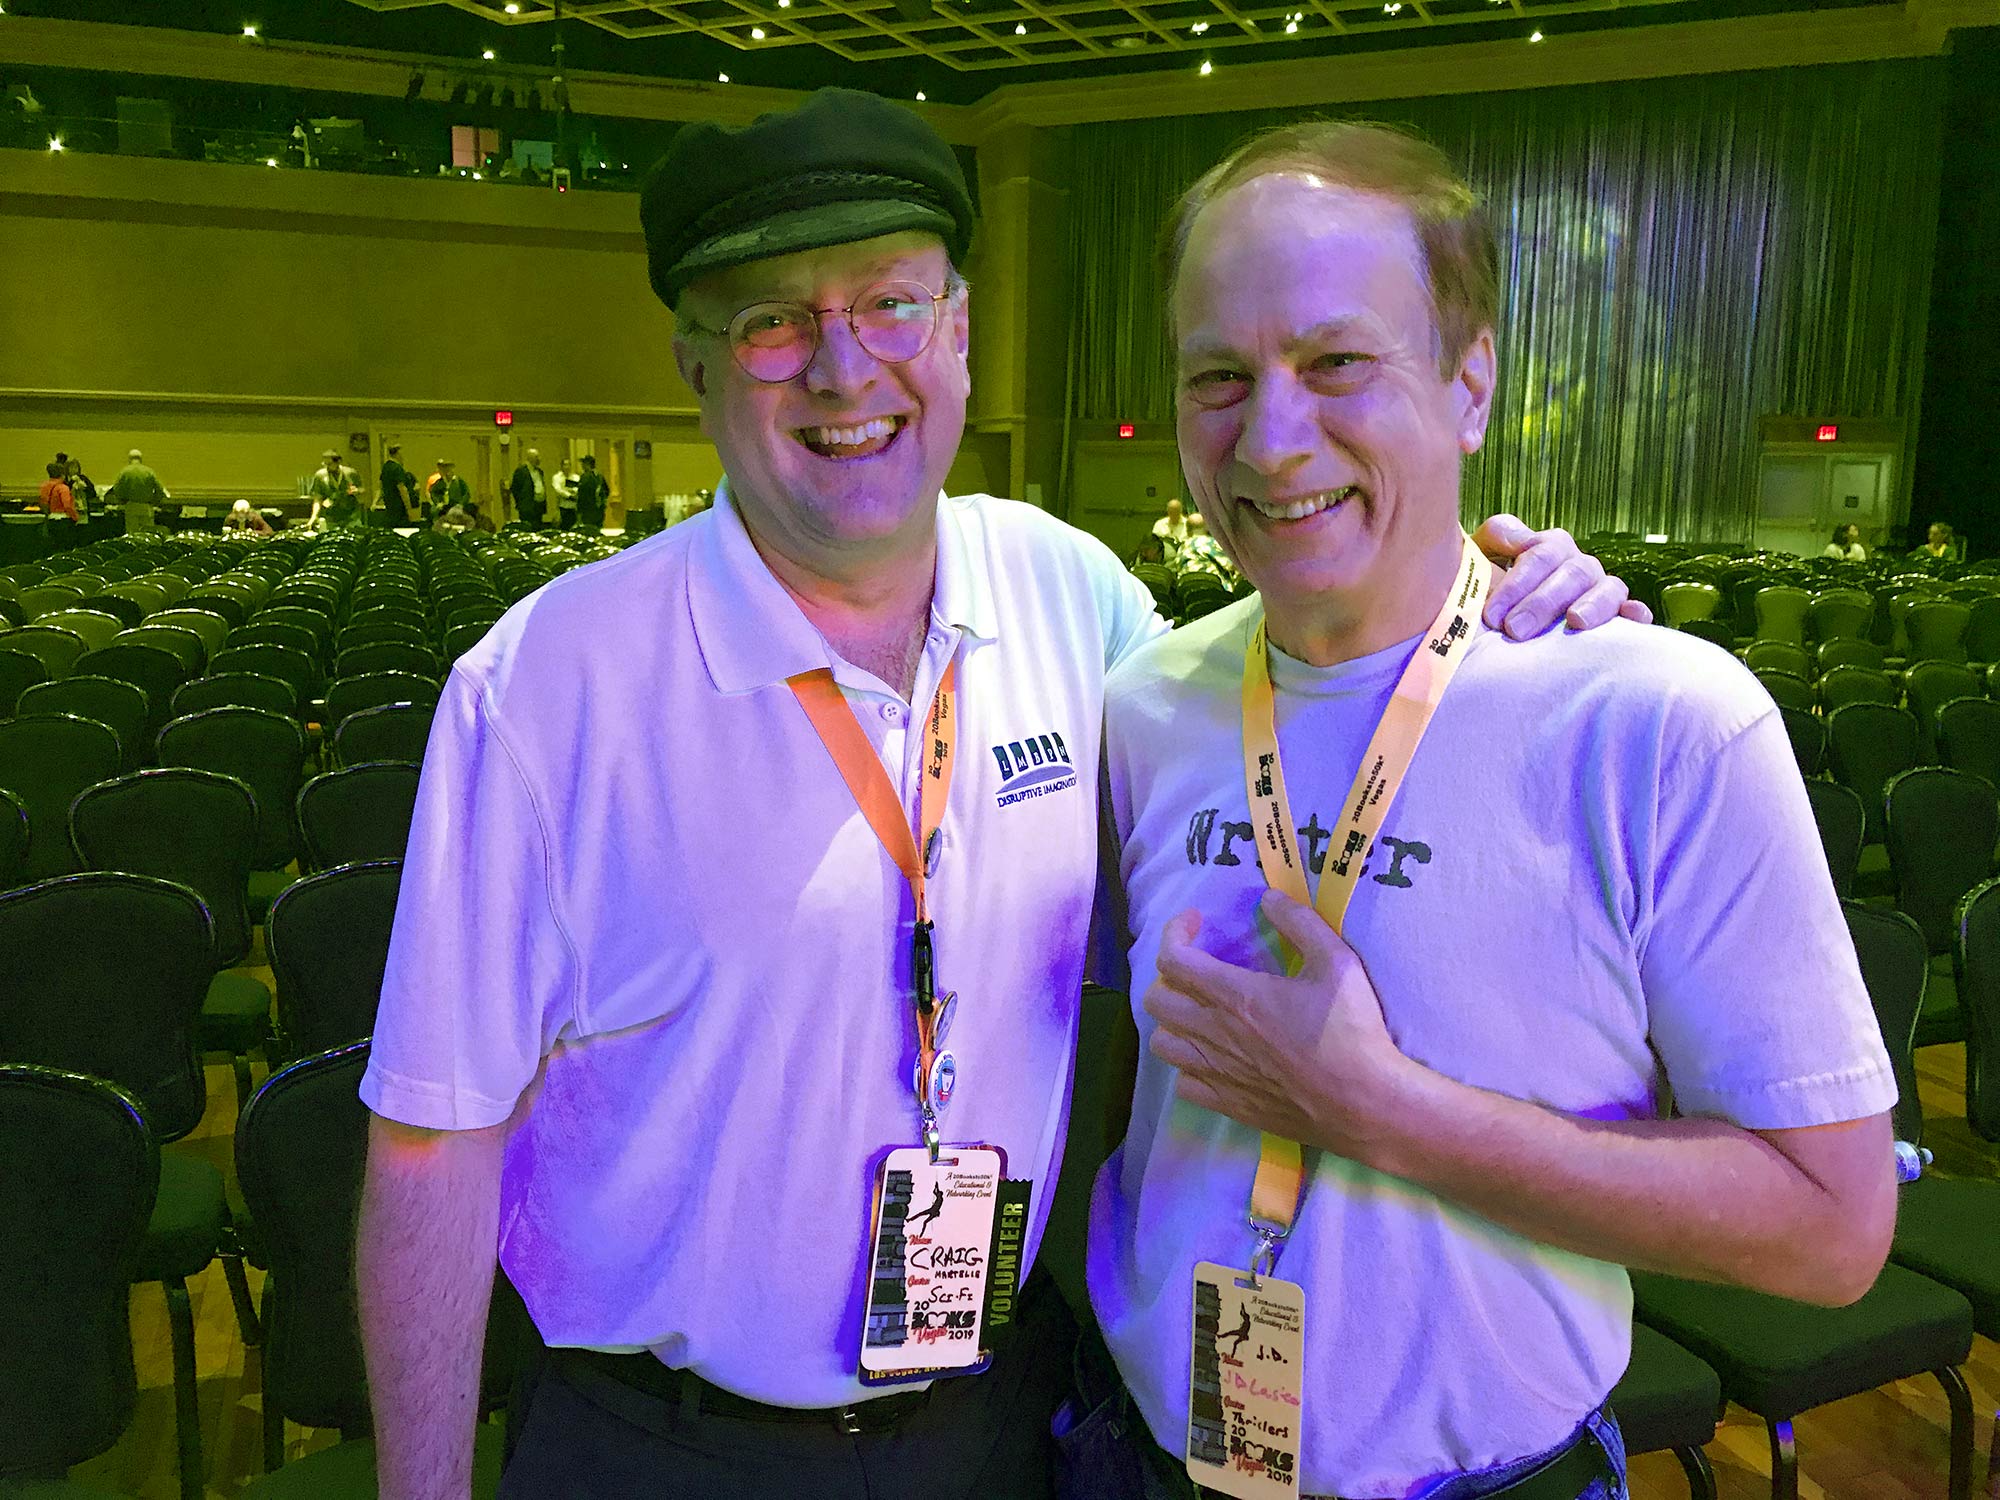 Authors Craig Martelle and JD Lasica in the main hall during a break in 20Books Vegas.